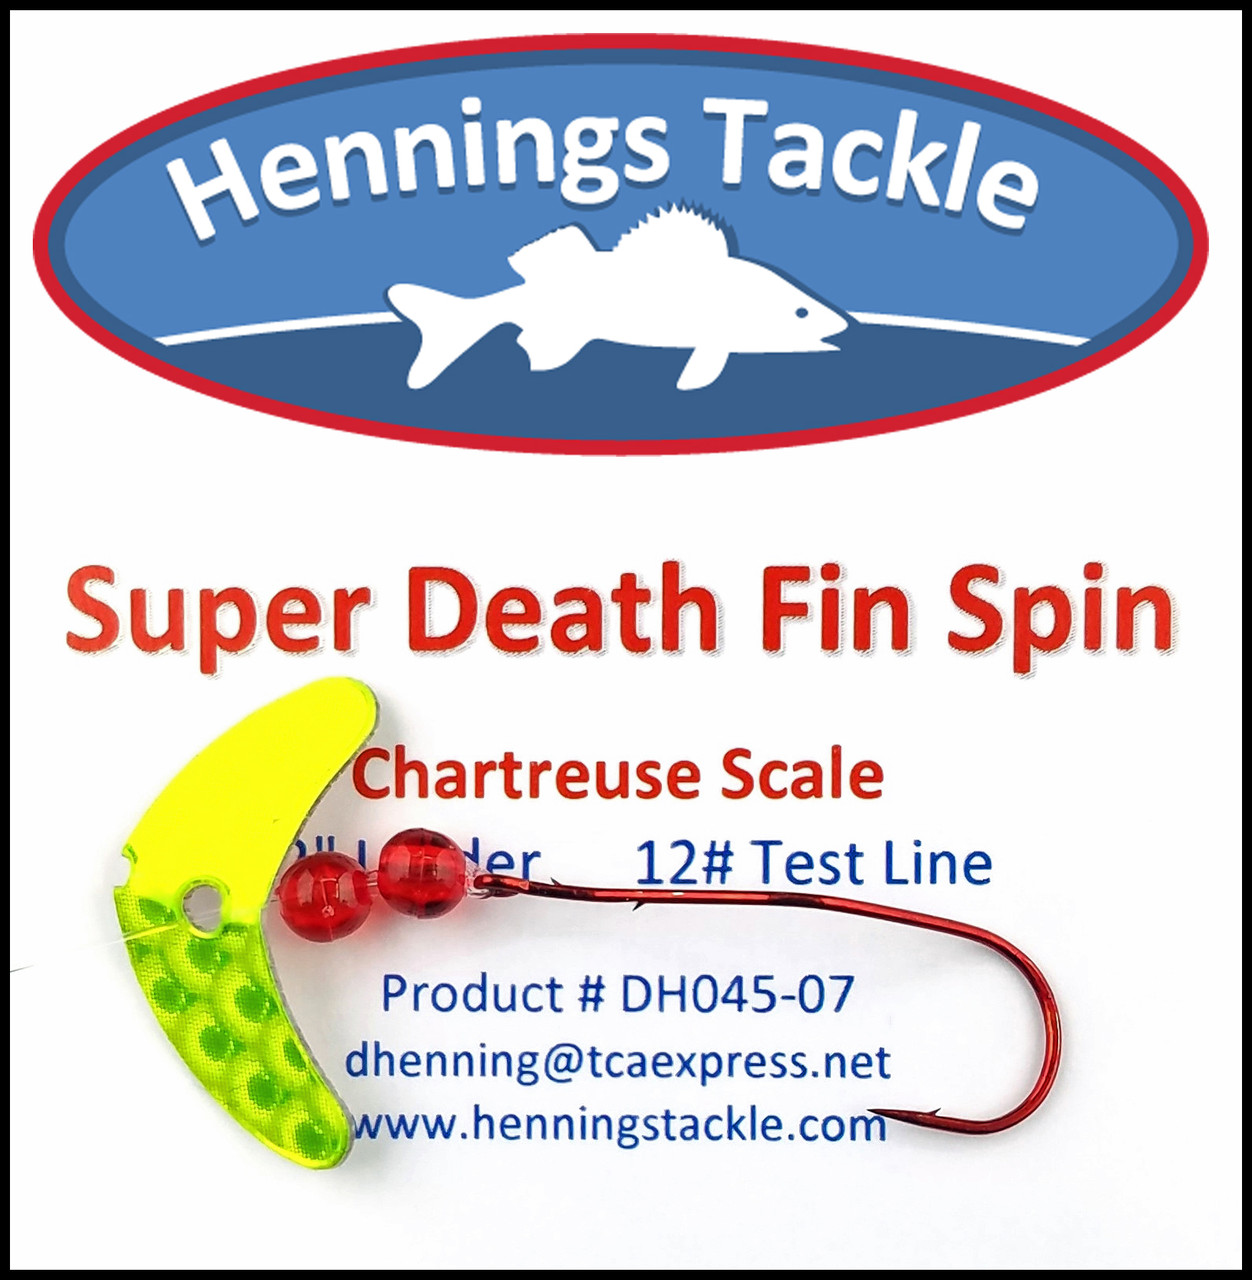 Super Death Fin Spins - Chartreuse Scale - Henning's Tackle